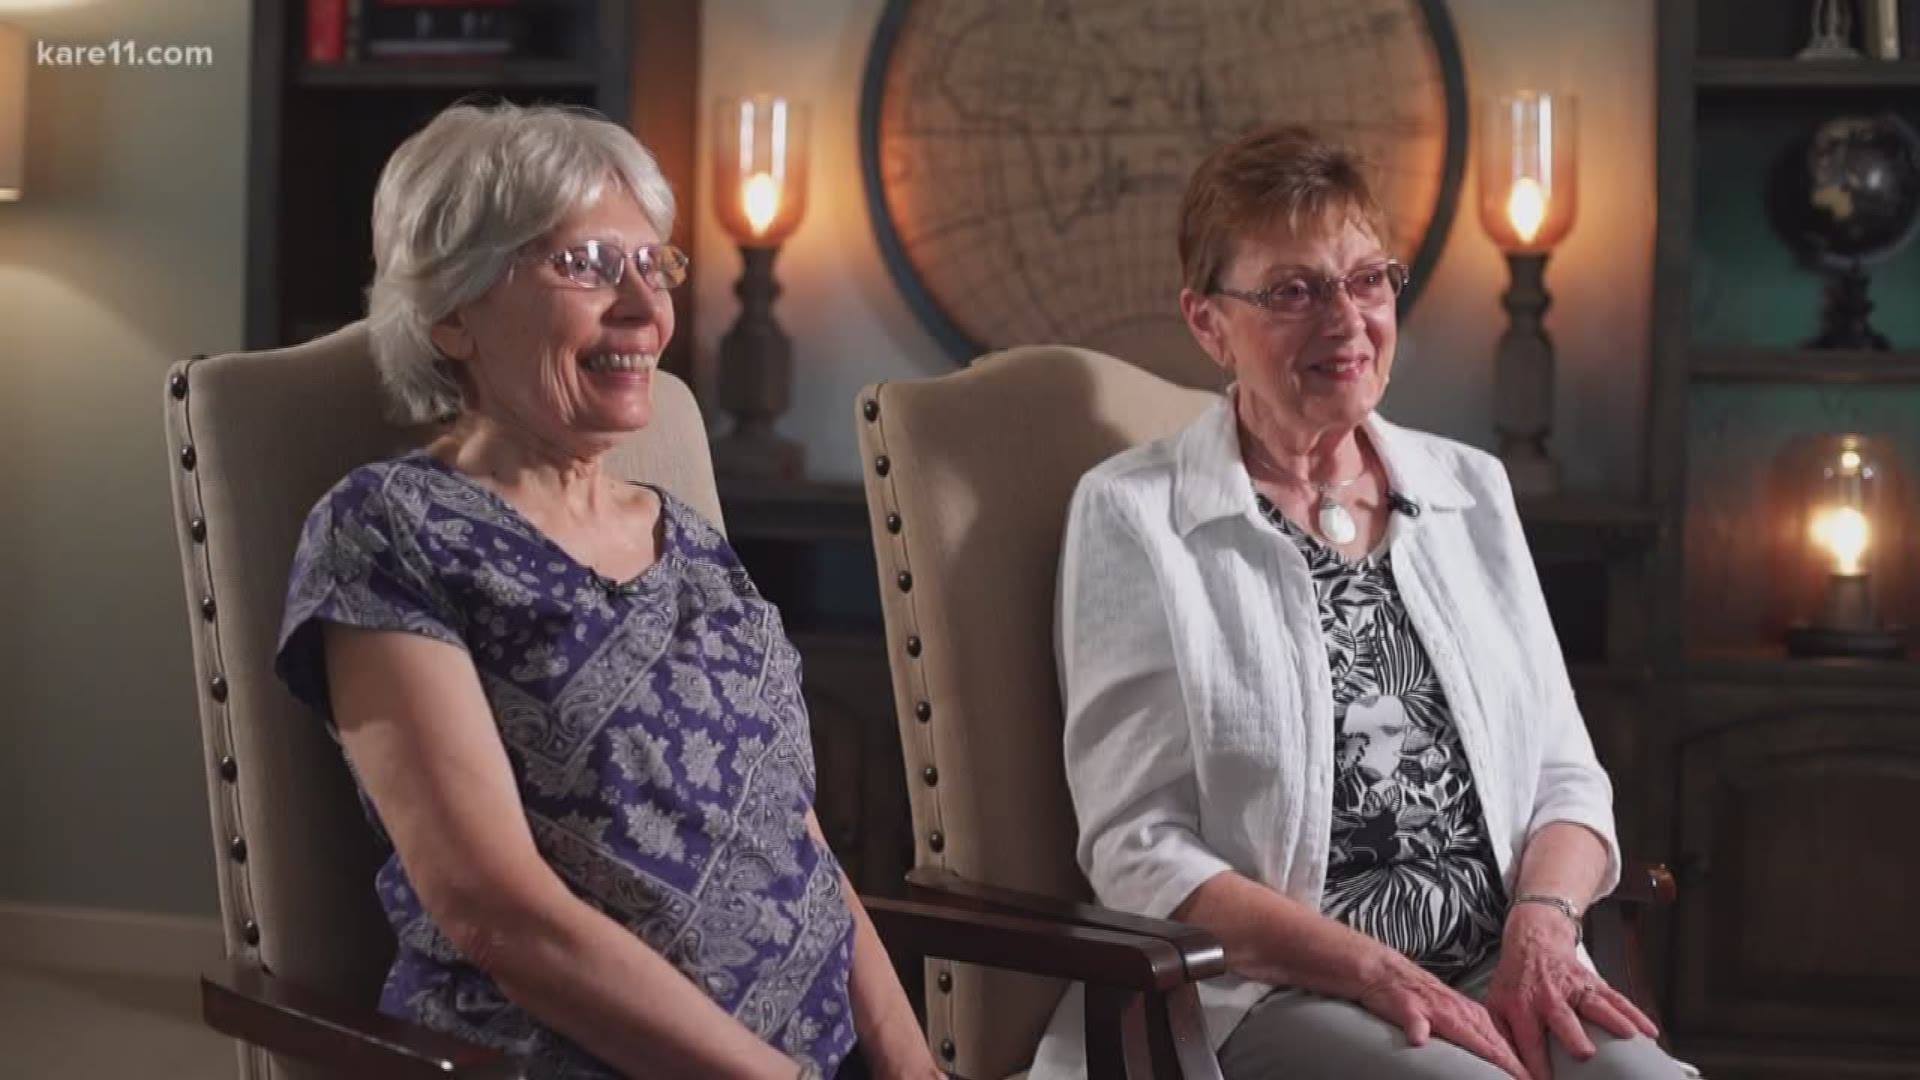 DNA tests confirm Denice Juneski and Linda Jourdeans were switched at birth in 1945. https://kare11.tv/2JFKYyf